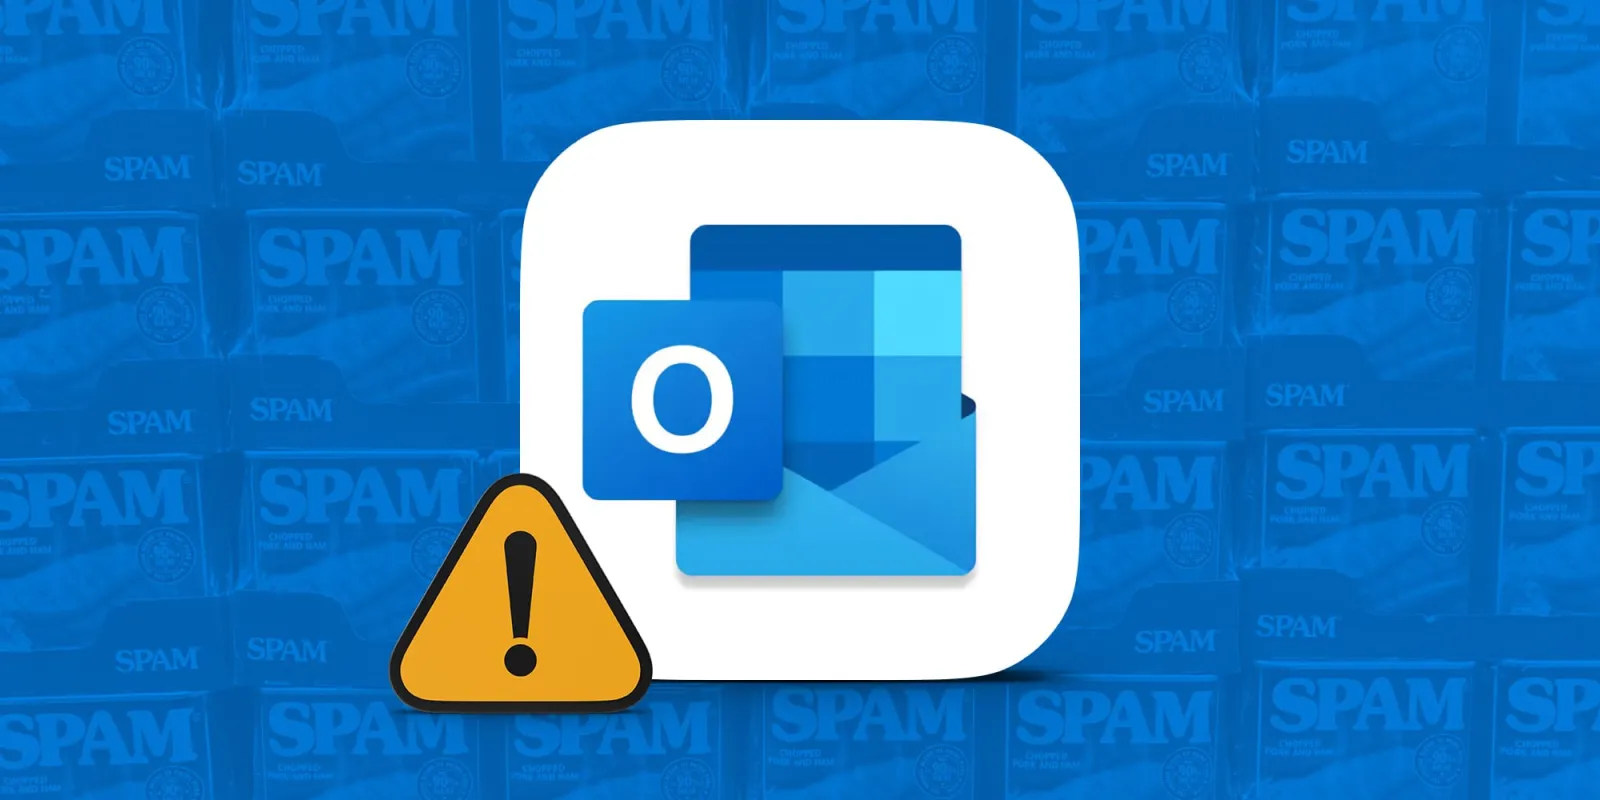 bloquear SPAM no hotmail outlook